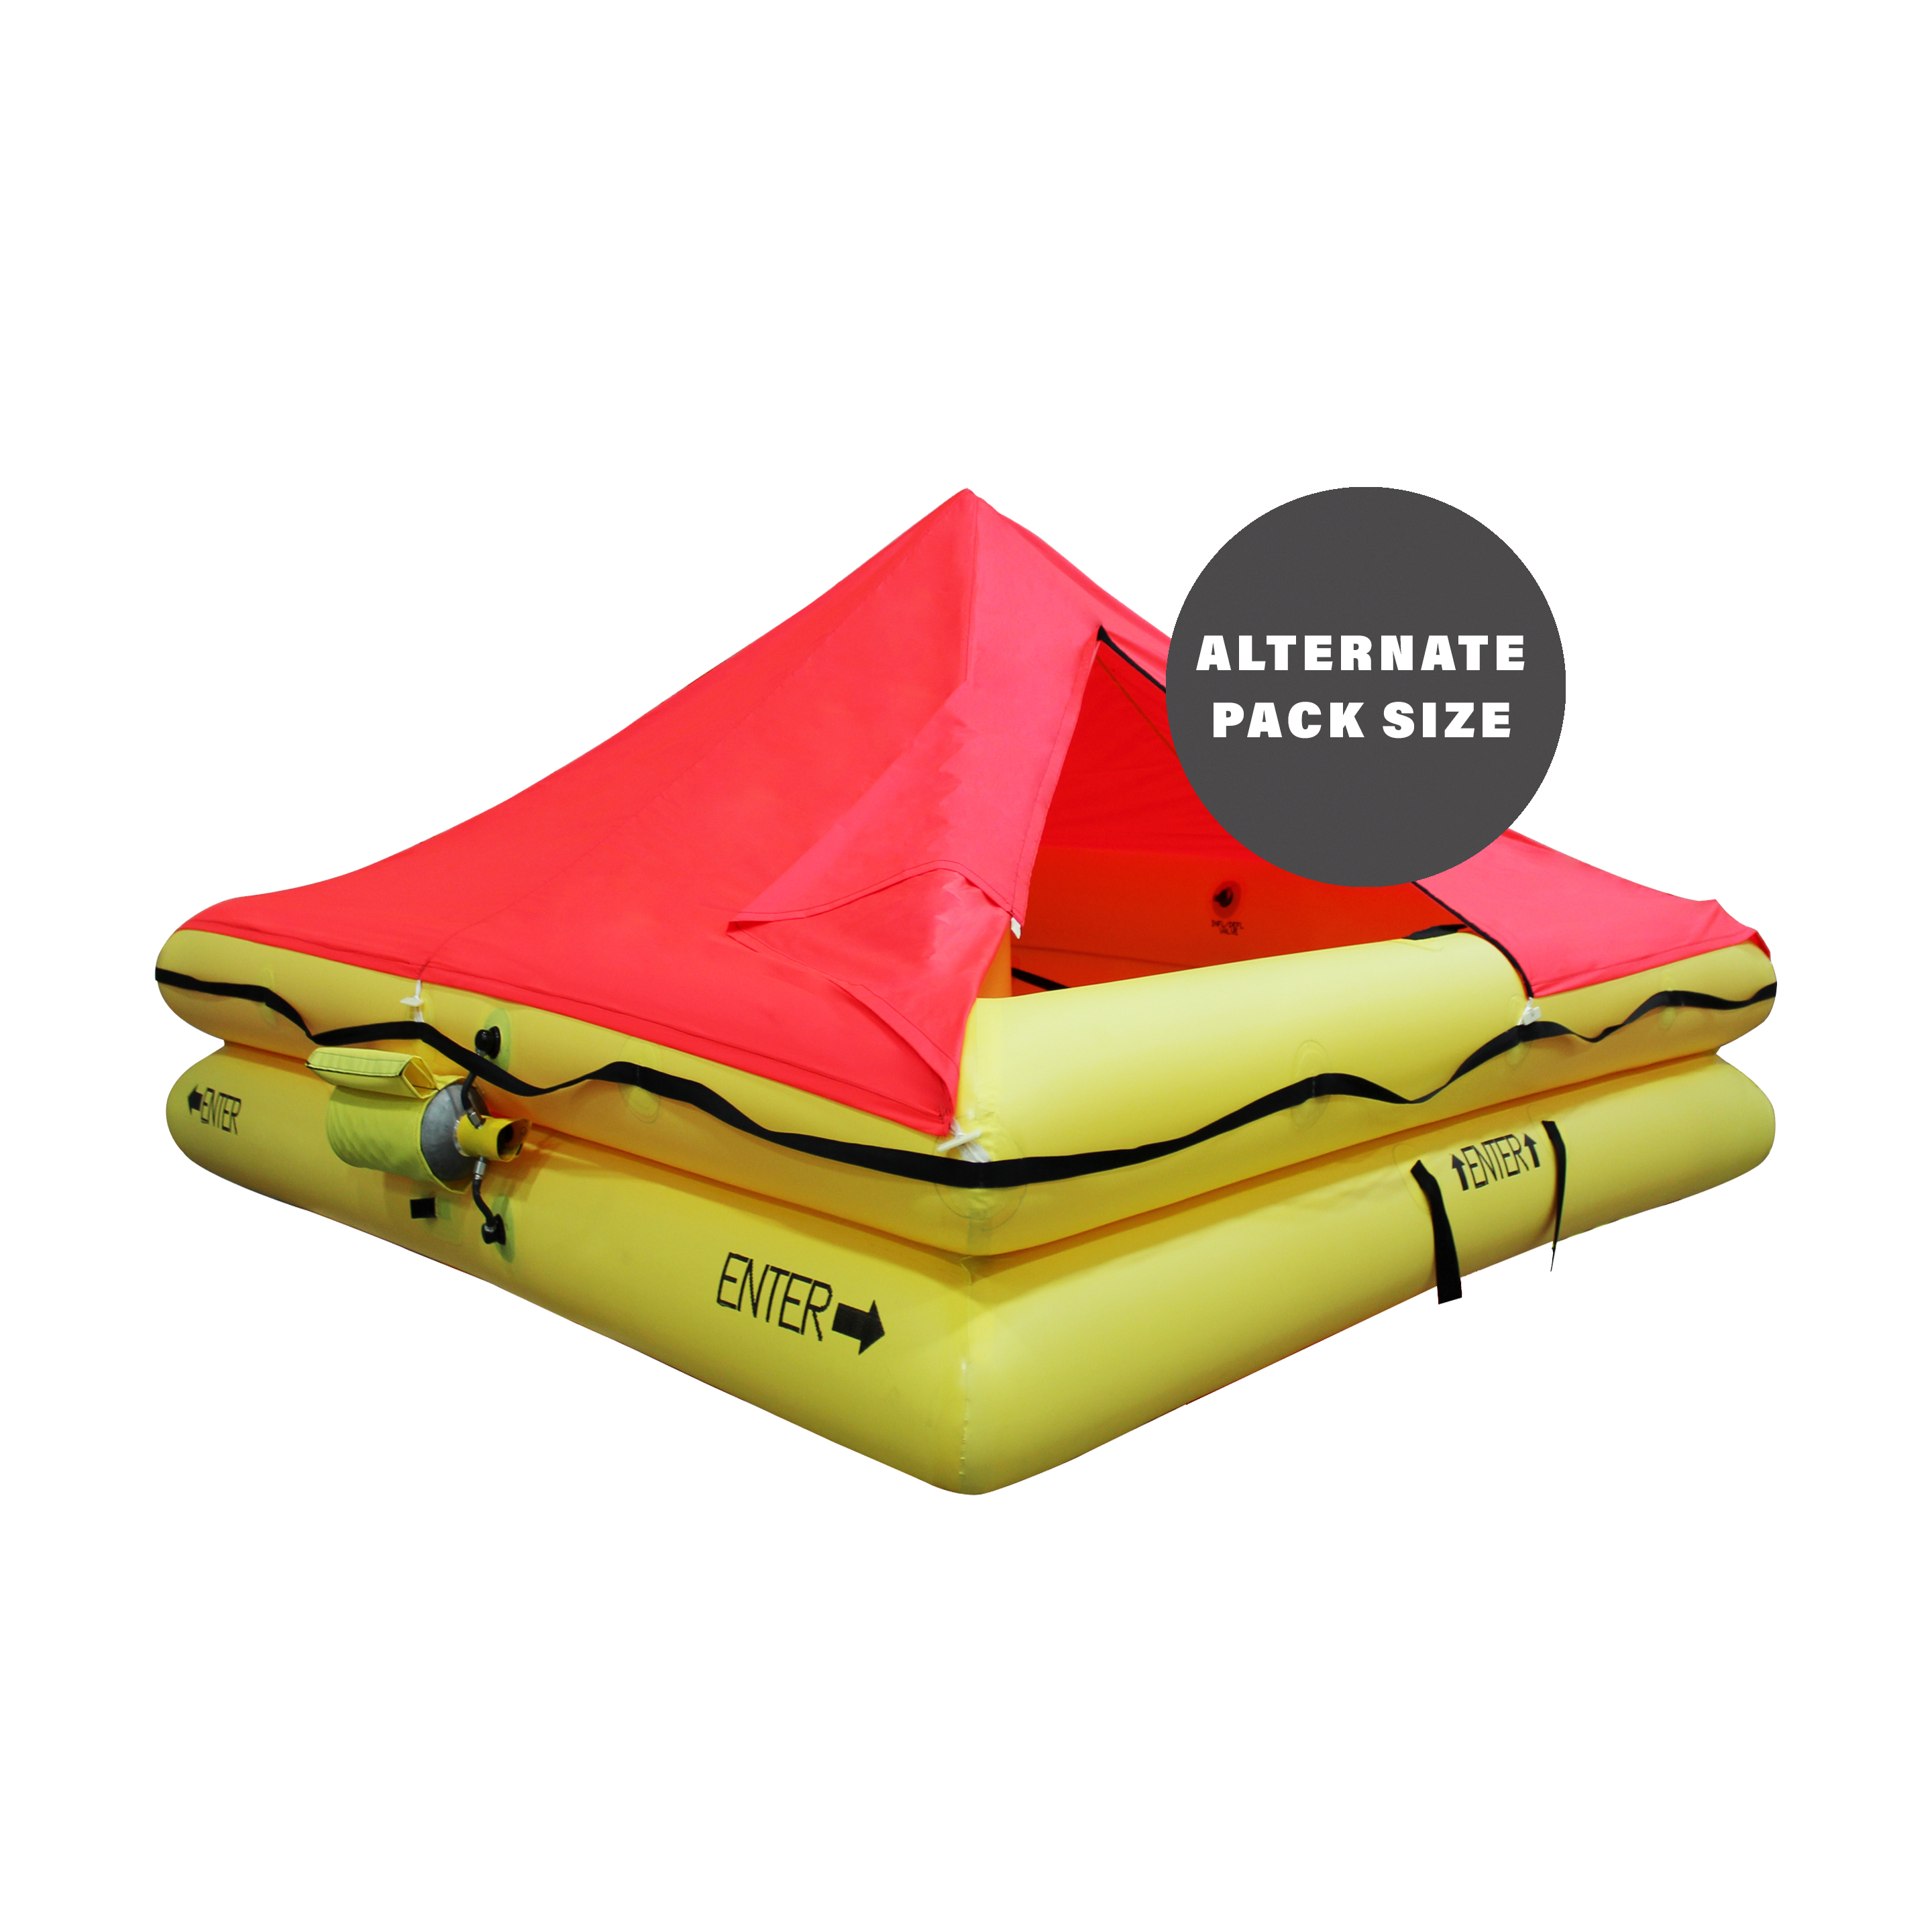 TSO 6 Person Endpack Life Raft with FAR 121 Survival Equipment Kit